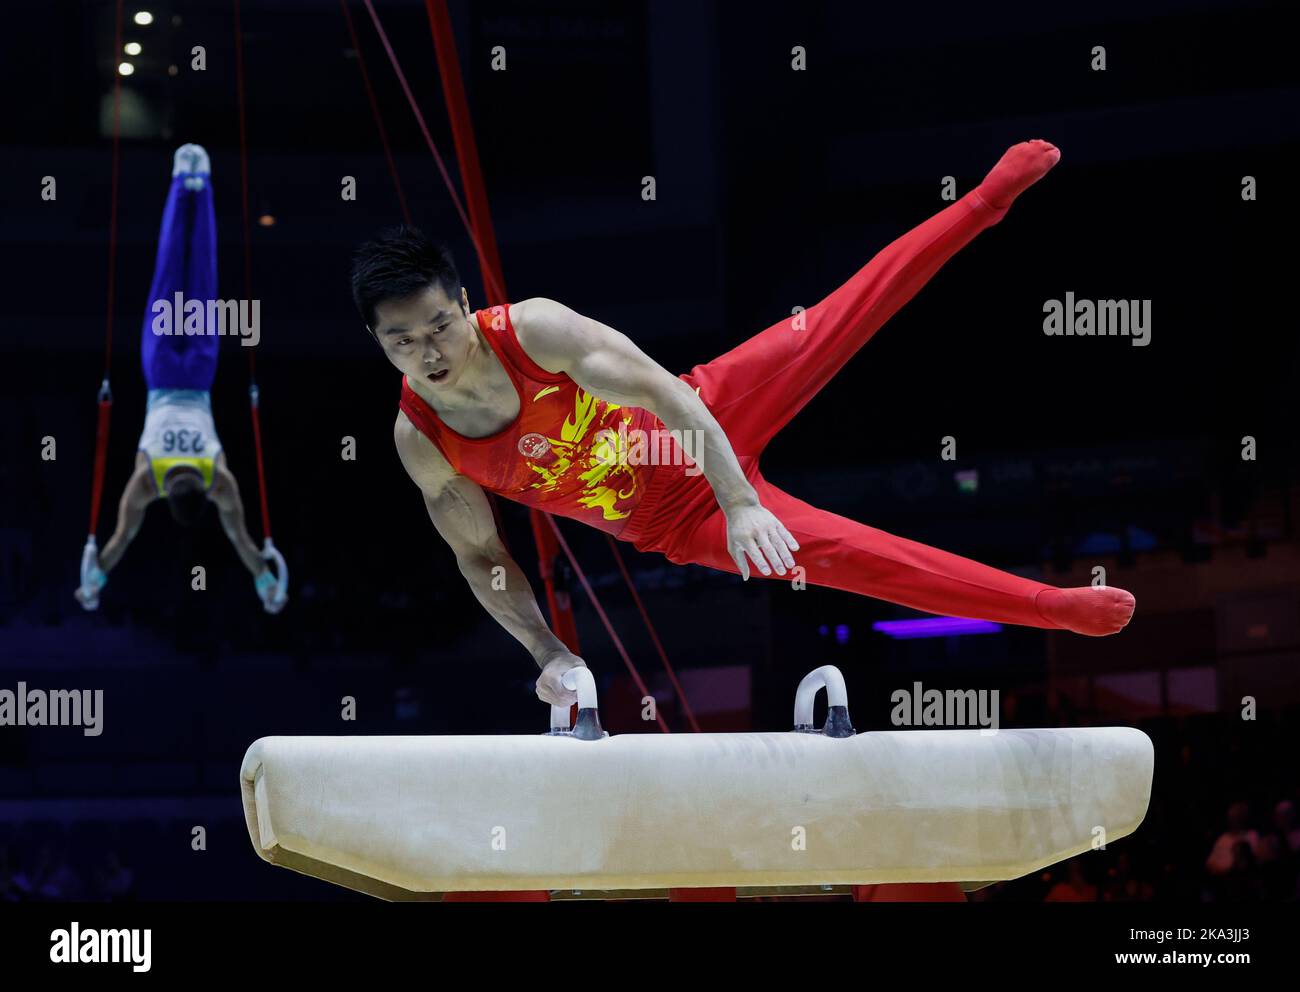 31st October 2022, M&amp;S Bank Arena, Liverpool, England; 2022 World Artistic Gymnastics Championships; Men's Qualification Pommel Horse - Hao You (CHN) Tokyo 2020 Olympic rings silver medallist Stock Photo